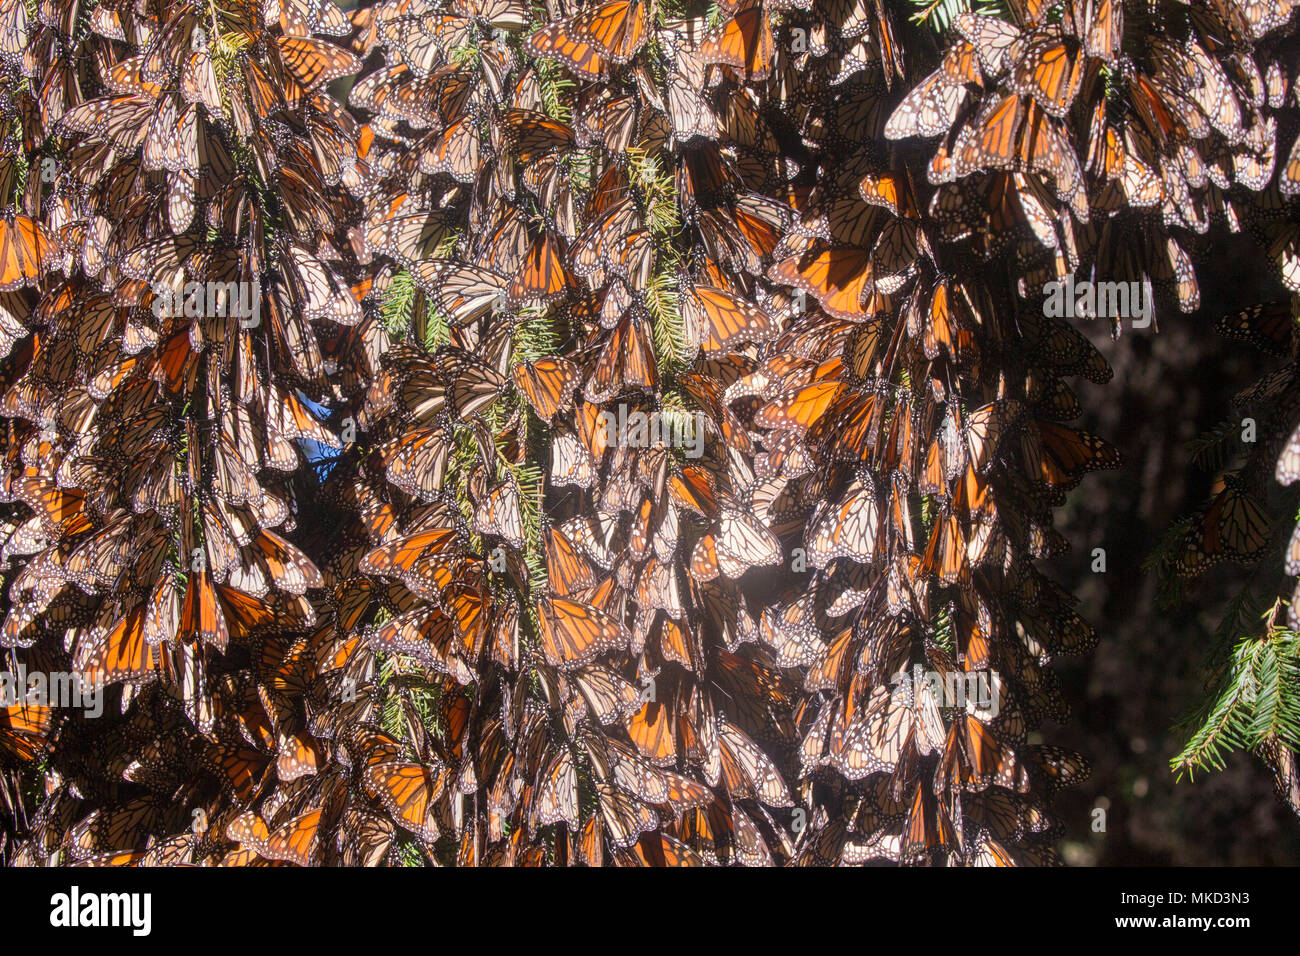 Monarch butterfly (Danaus plexippus), In wintering from November to March in oyamel pine forests (Abies religiosa), El Rosario, Reserve of the Biosfera Monarca, Angangueo, State of Michoacan, Mexico Stock Photo